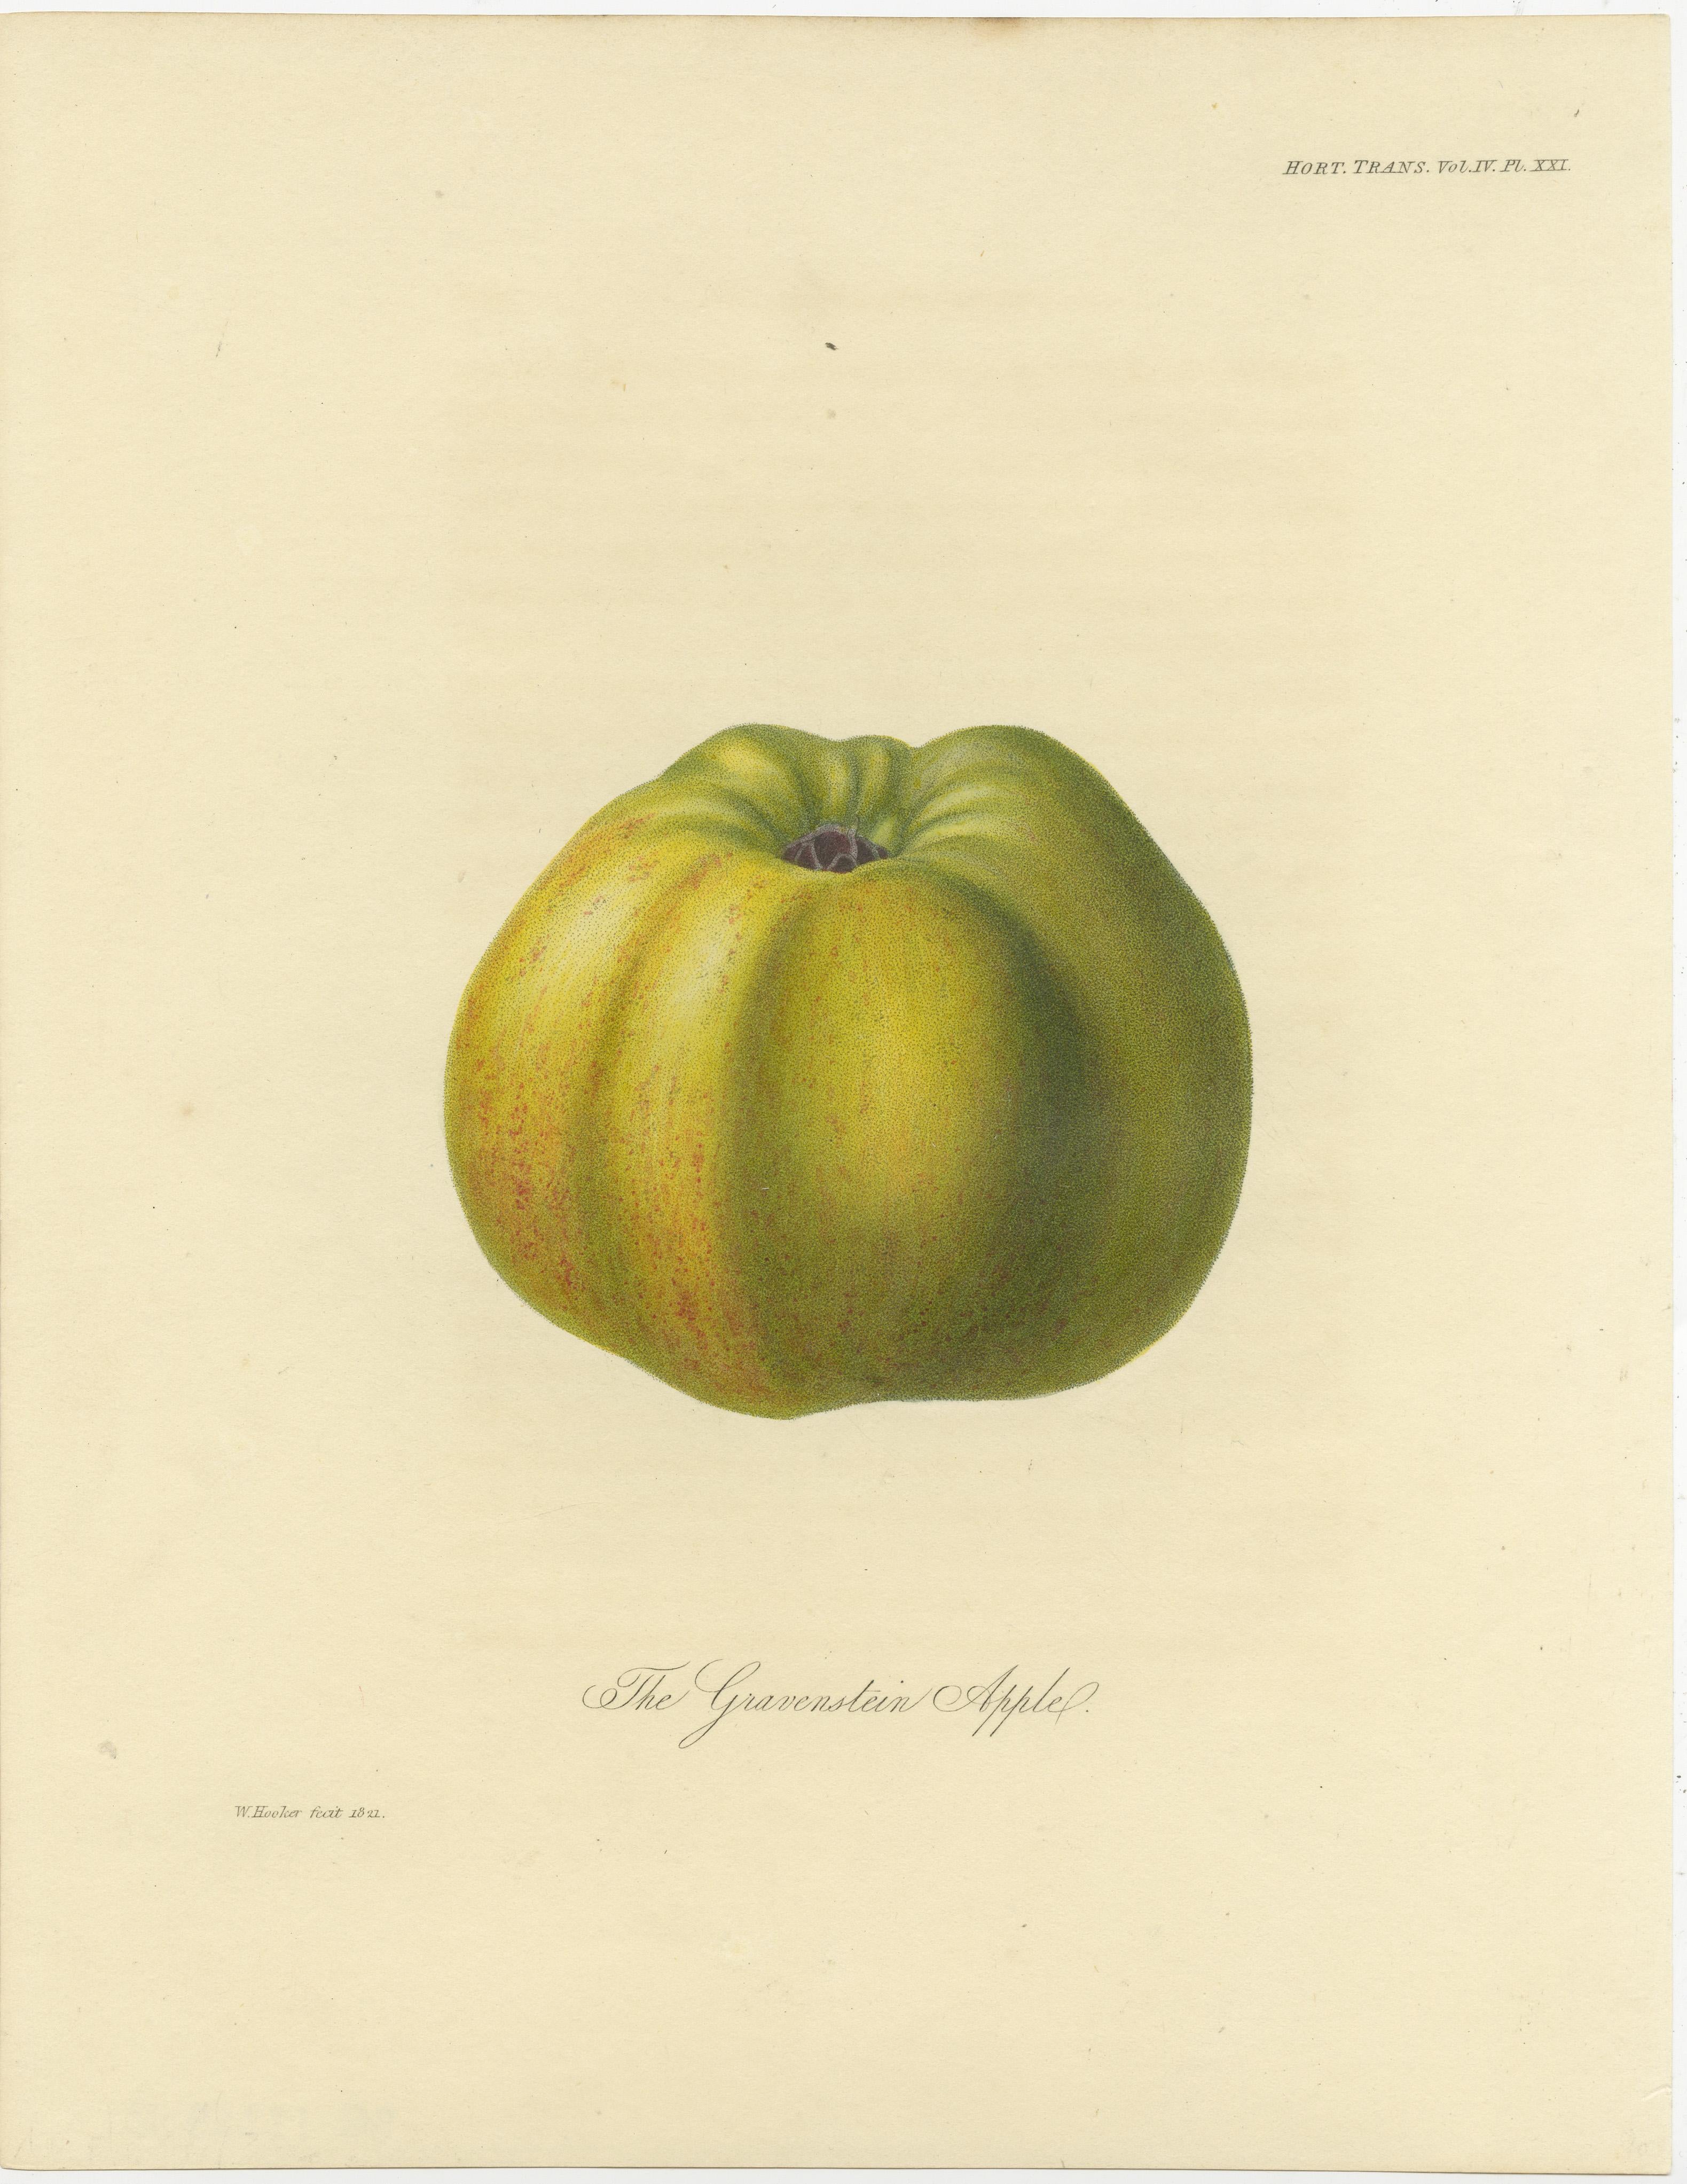 Set of 2 antique prints of apples. It shows the Gravenstein Apple and Alexander Apple. These prints originate from 'Transactions of the Horticultural Society of London' published circa 1835.

In Transactions of the Horticultural Society of London